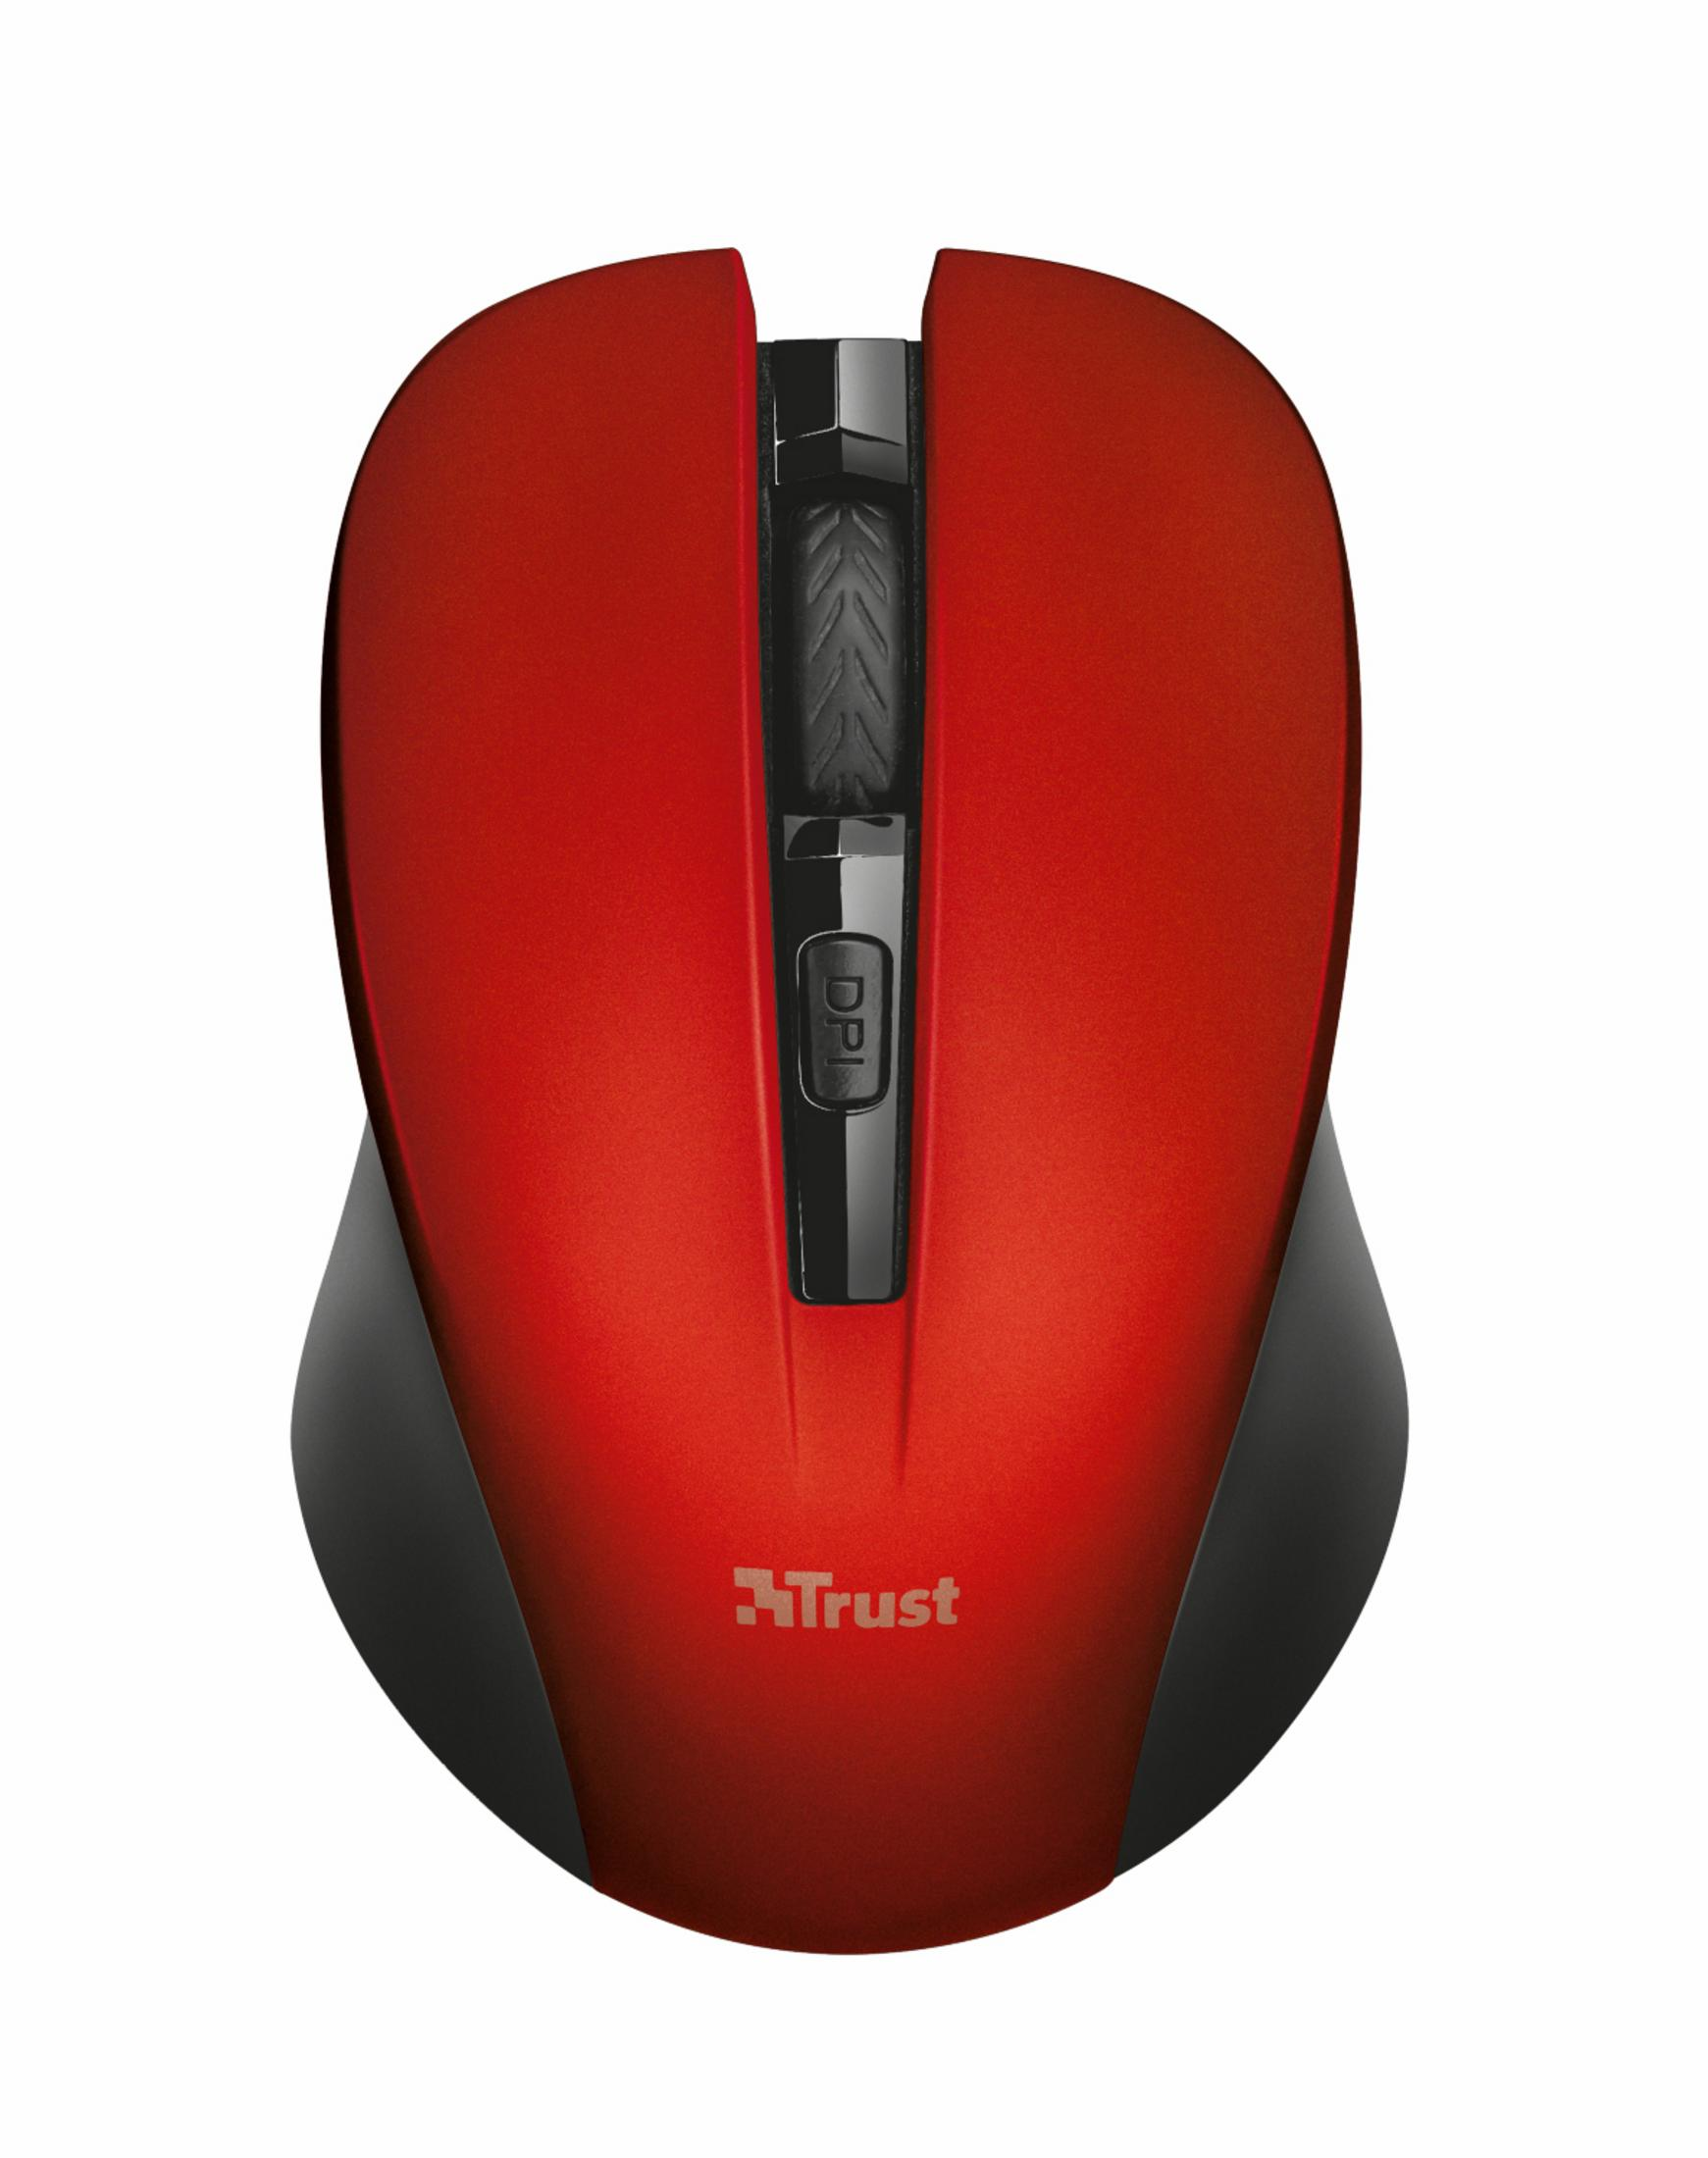 TRUST 21871 MYDO Maus, Rot MOUSE WRLS CLICK RED SILENT